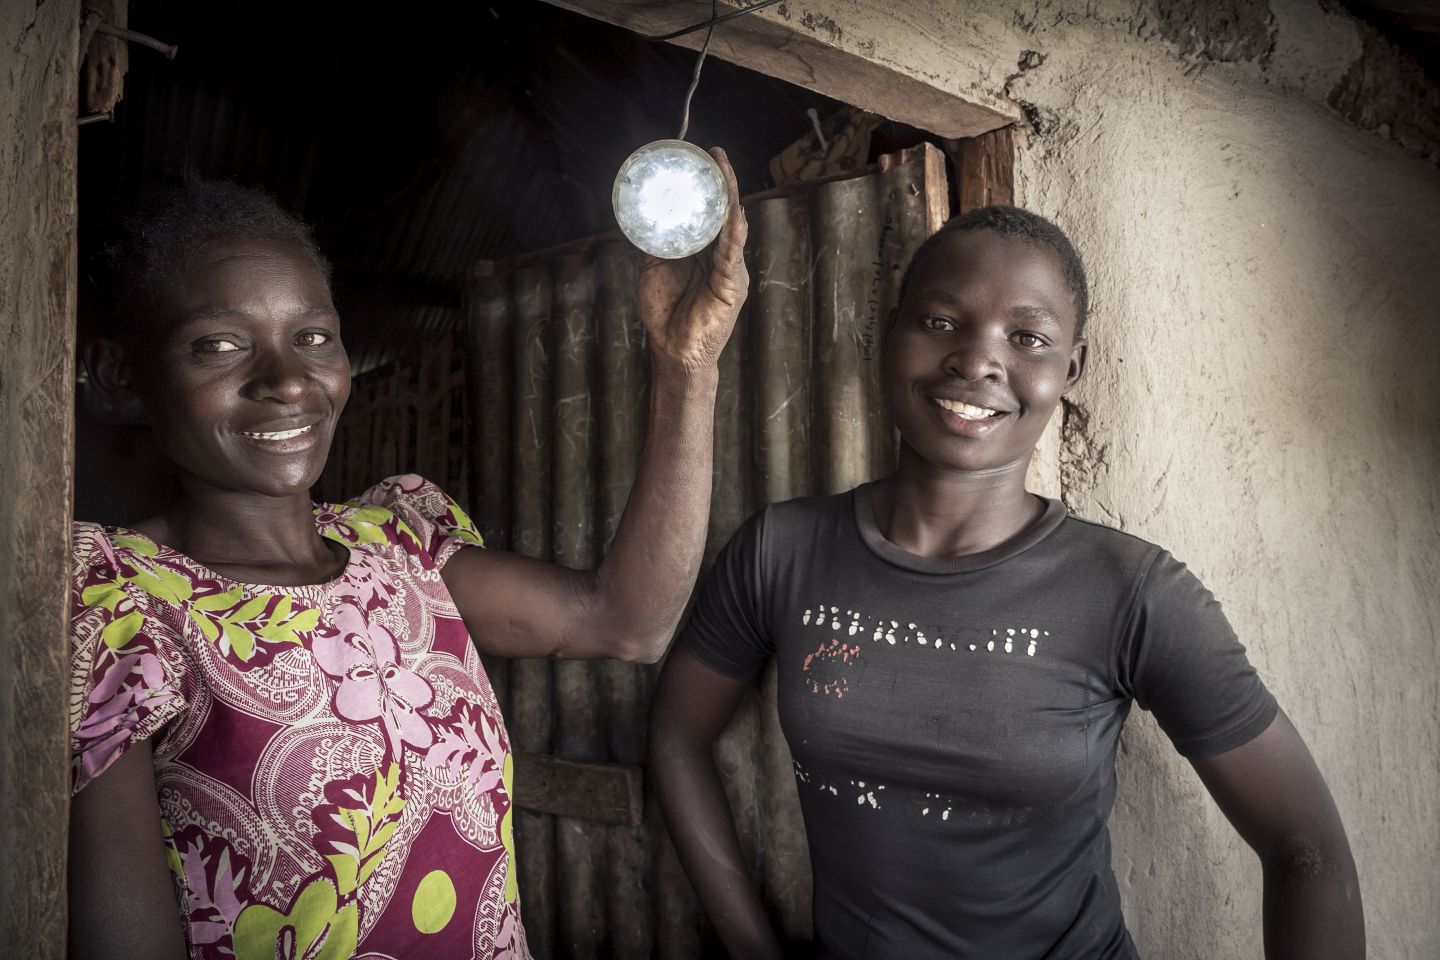 How do grid and off-grid systems enhance or restrict gender equality?